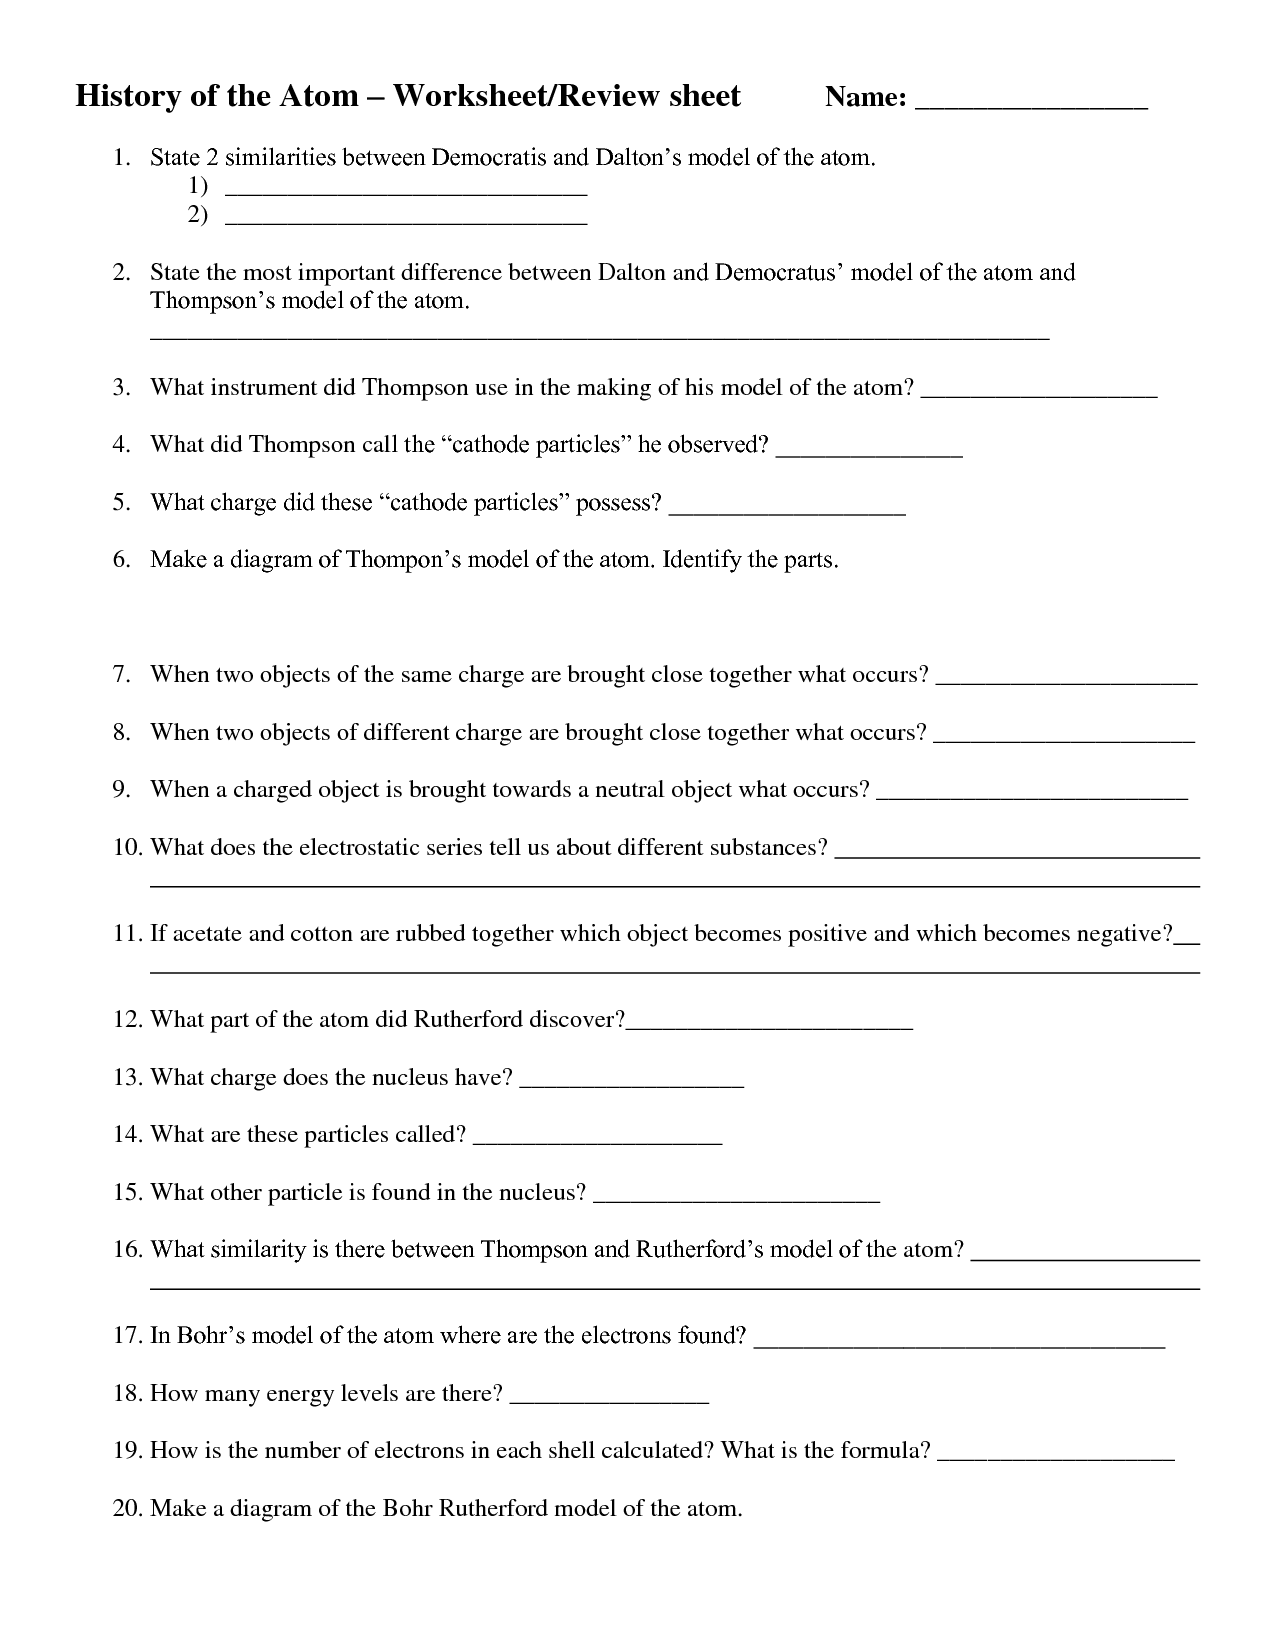 Printables Of History Of The Atom Worksheet Answers